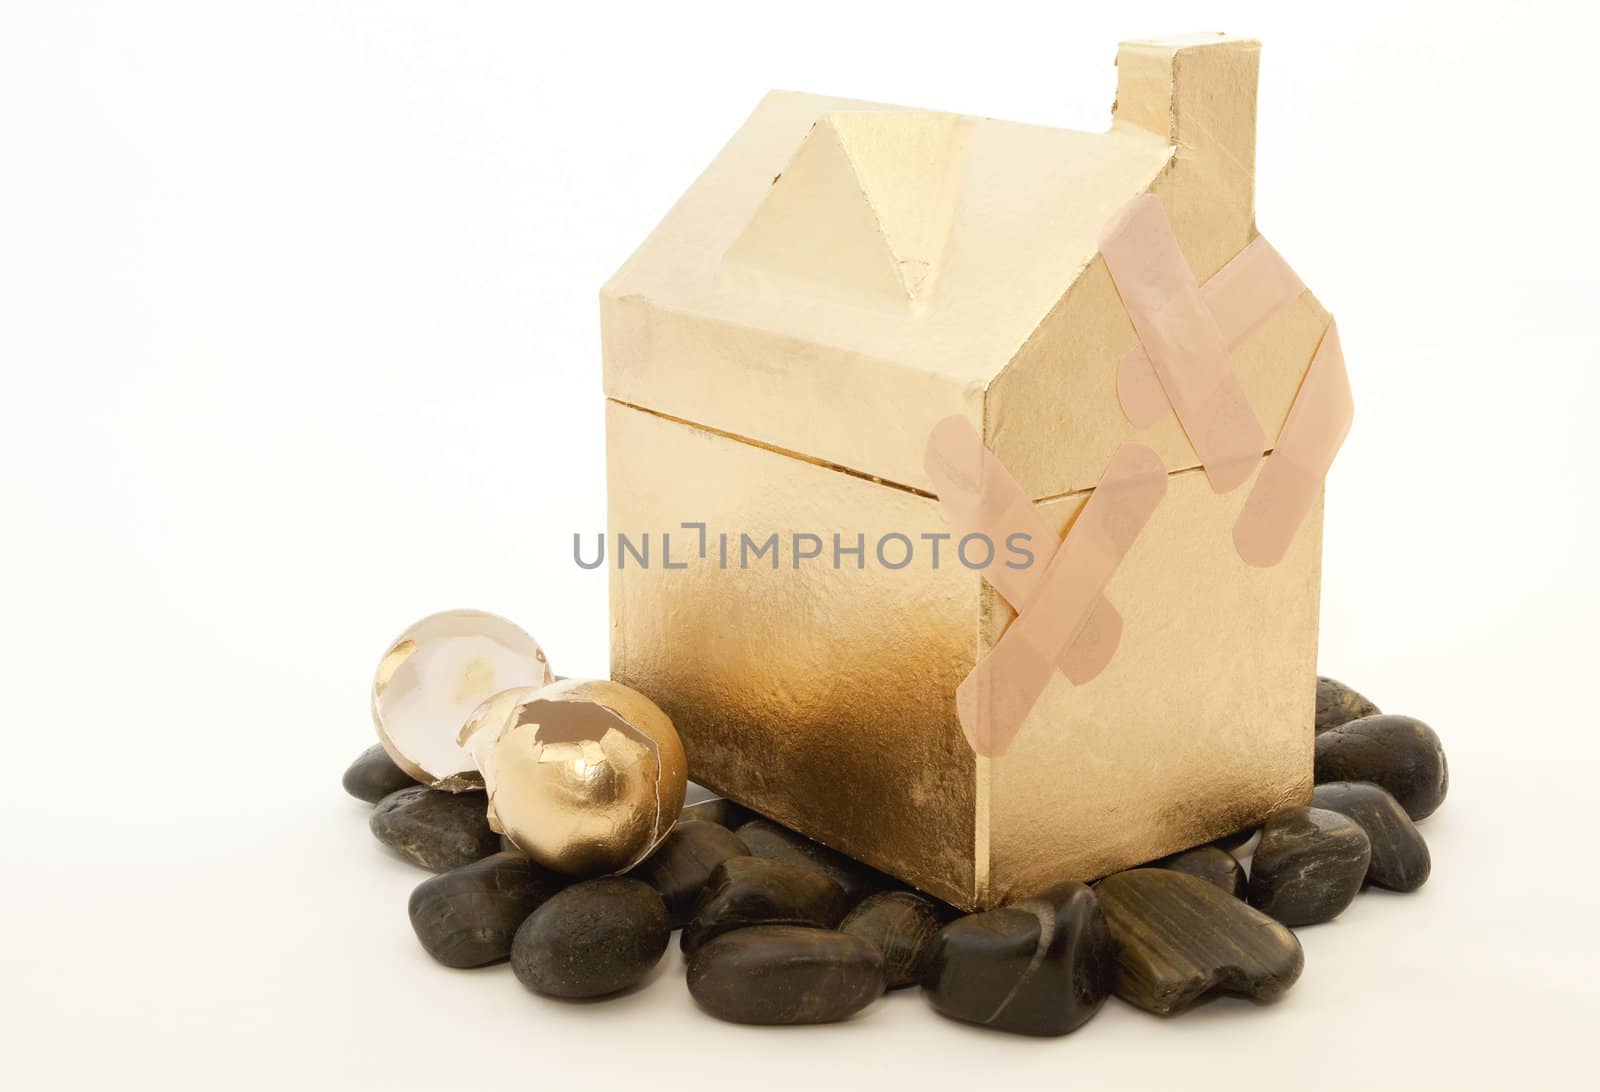 Golden house and broken nest eggs reflect the dire situation of real estate investments on the rocks resulting in broken nest eggs, retirements in need of first aid, and destroyed dreams